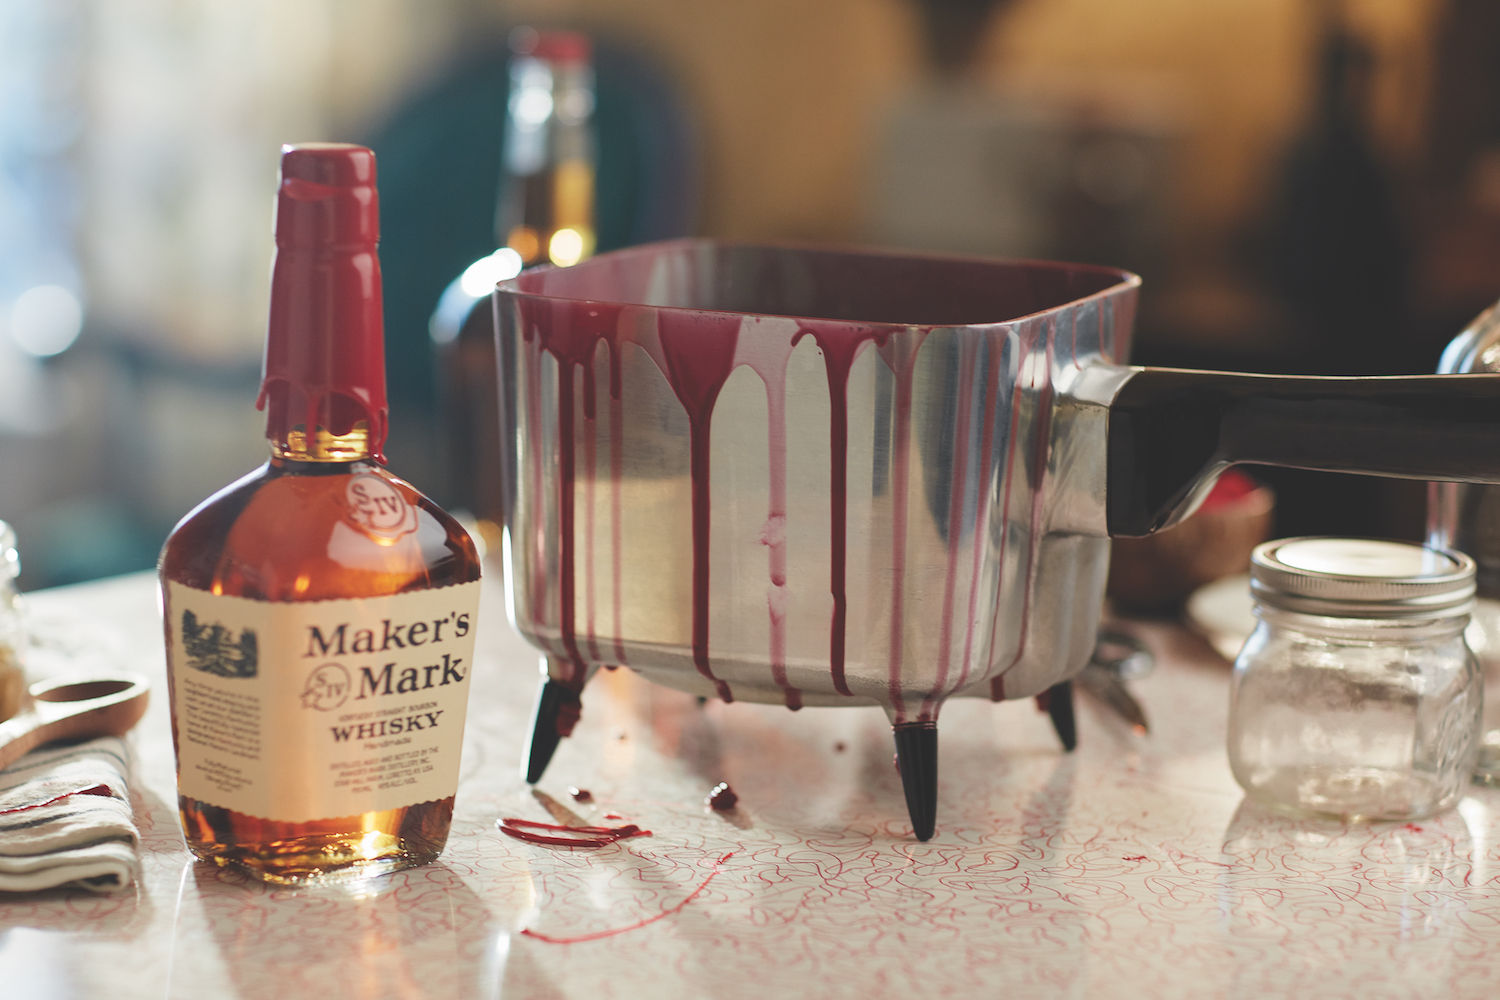 Here’s how you can experience Maker’s Mark craftsmanship and heritage in Singapore